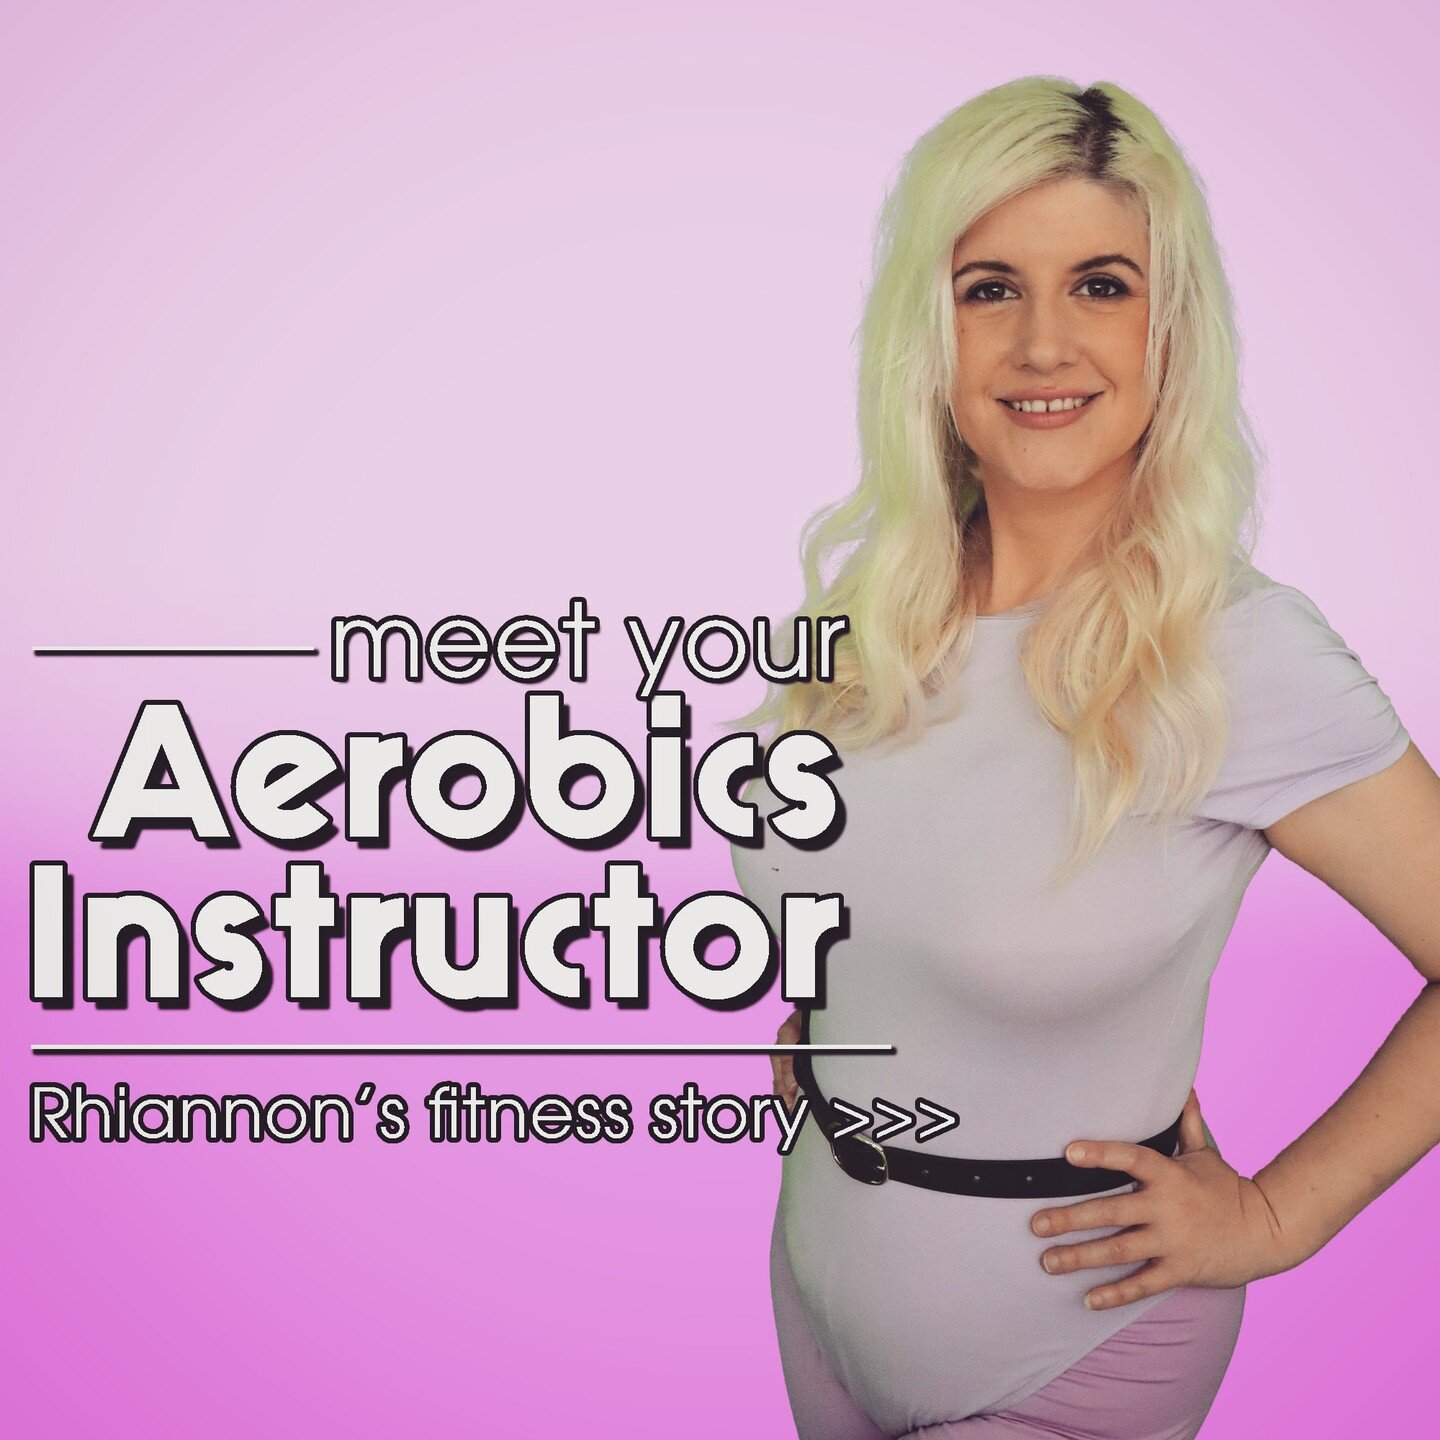 Looking for a fun and effective way to get in shape? Look no further than The Aerobics Channel! But why me? 

Well, good question. I&rsquo;m a registered personal trainer with AusActive, fully qualified with a Certificate III and IV in Fitness, with 